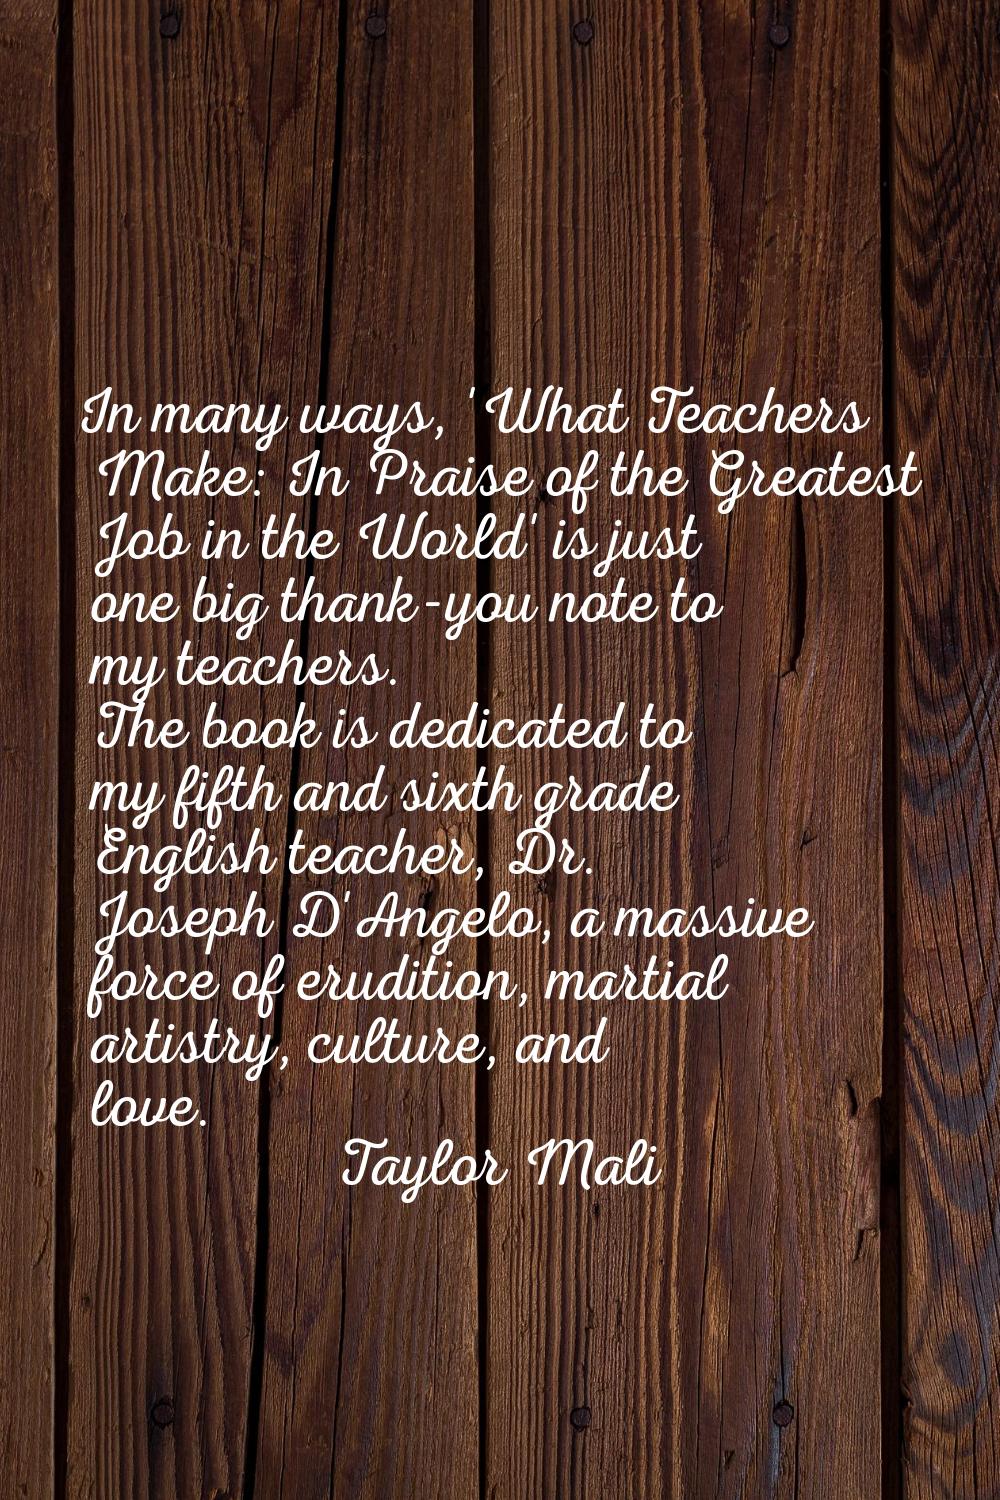 In many ways, 'What Teachers Make: In Praise of the Greatest Job in the World' is just one big than